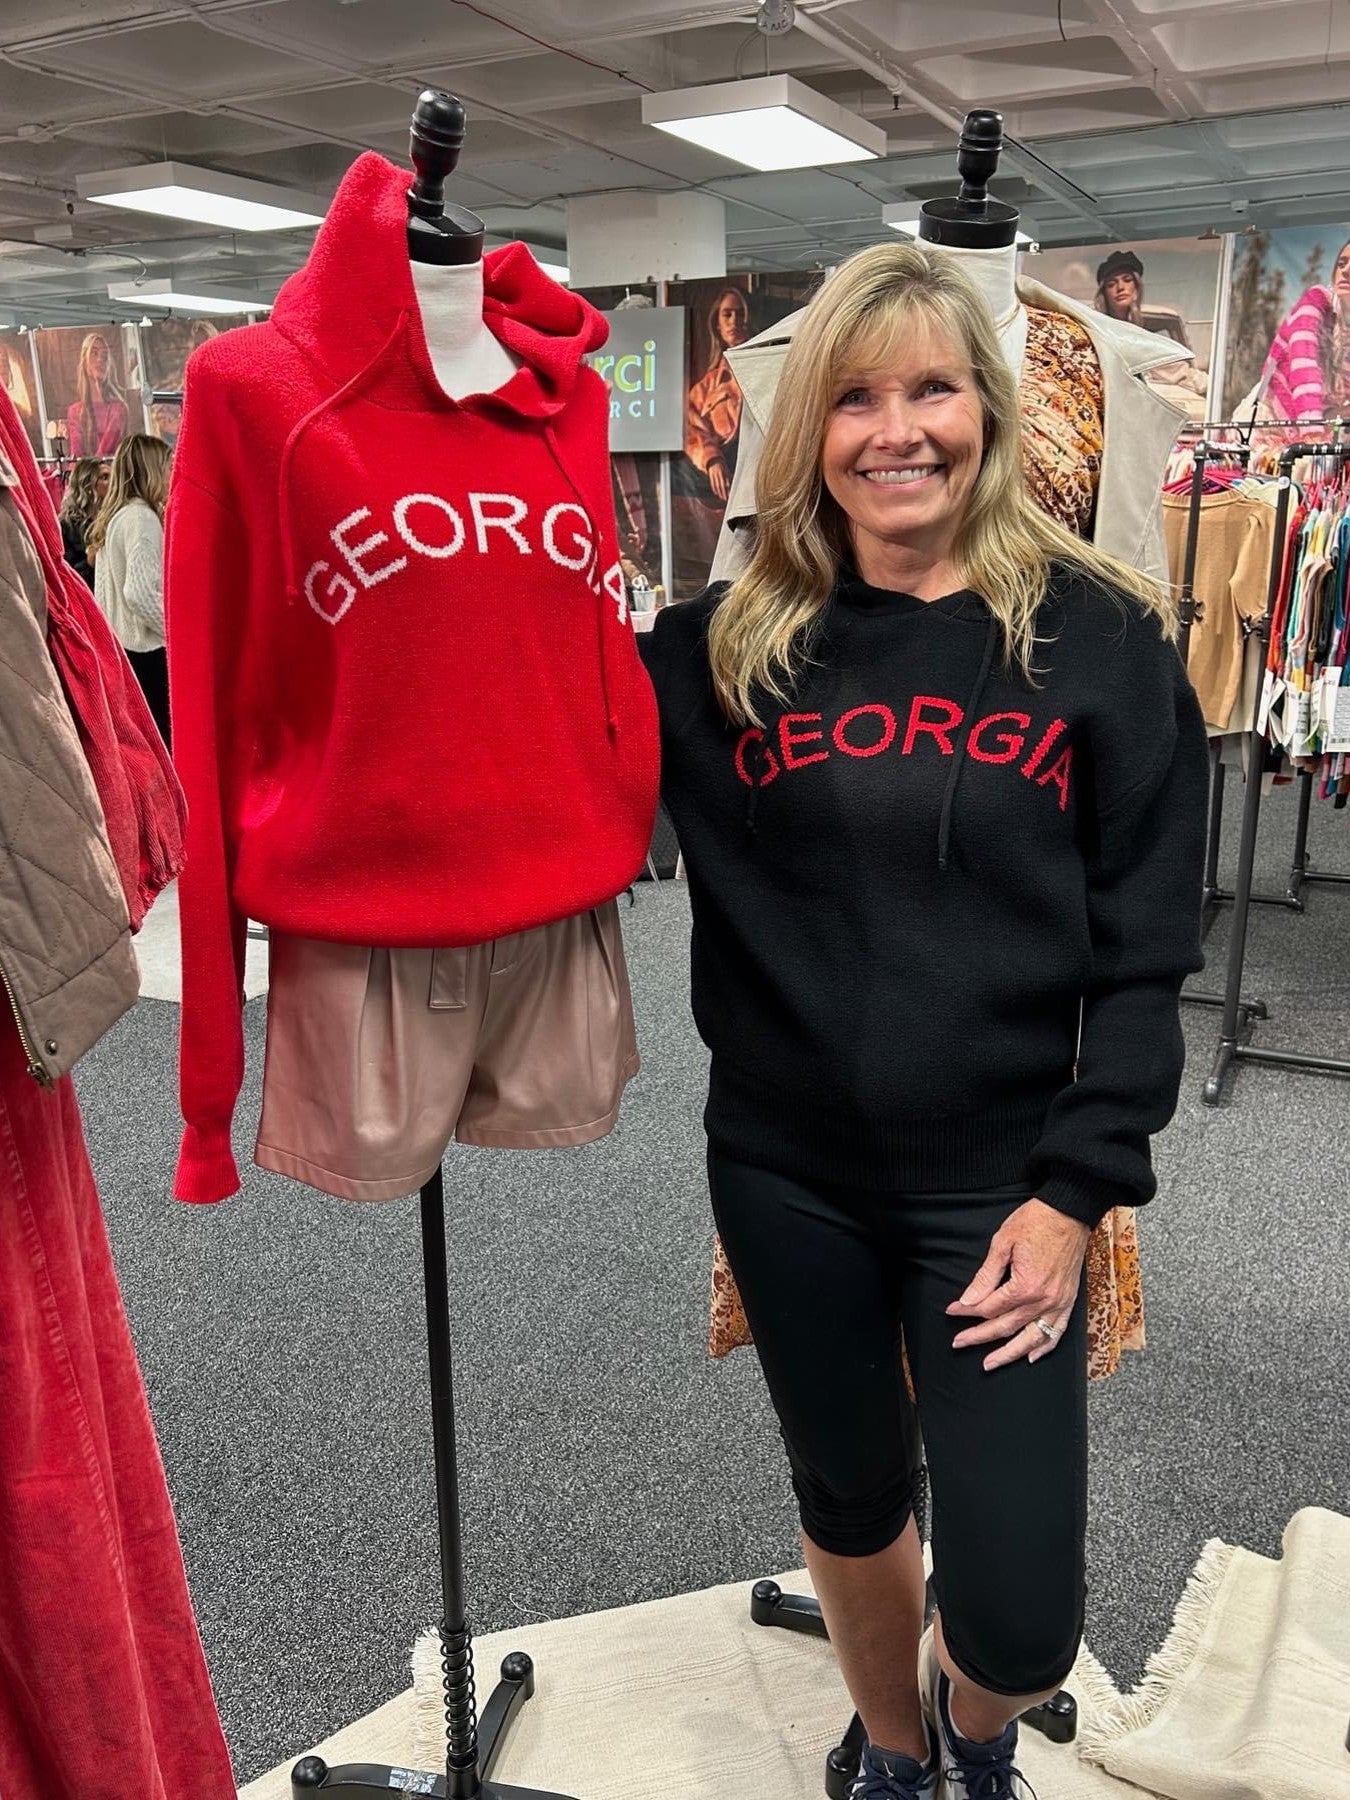 The Georgia Sweater is make of the softest yarn, has a hood and is so stinkin' cute! Who can resist sharing our love for the Dawgs in a bold, yet subtle way!?  The sweater is available in red and in black. It runs true to size.   Carolee and the mannequin are wearing a small.   Material: Made of 43% Viscose, 35% nylon, 22% polyester.  Care Instructions: Hand wash cold and line dry.